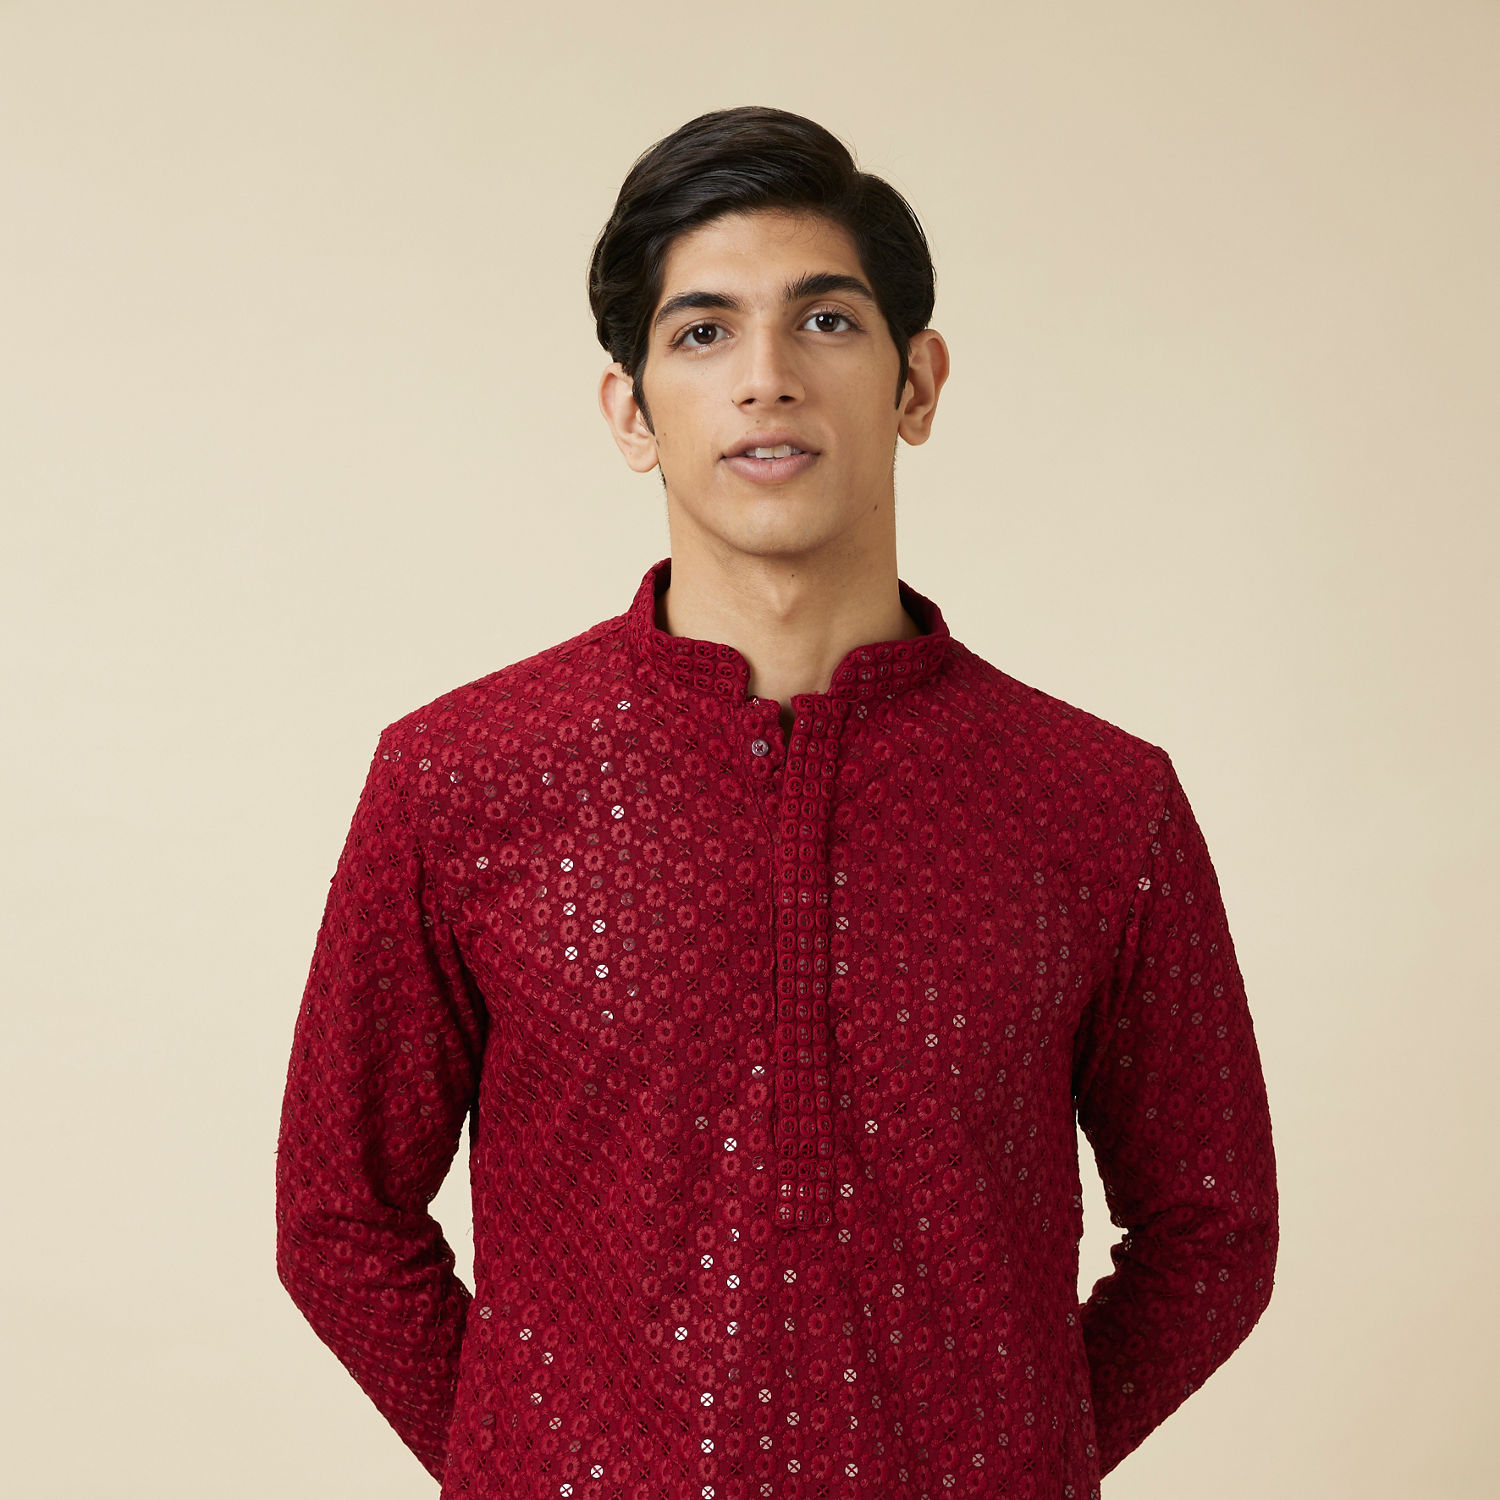 Mens Wear: Buy Indian Men Traditional Clothing Online